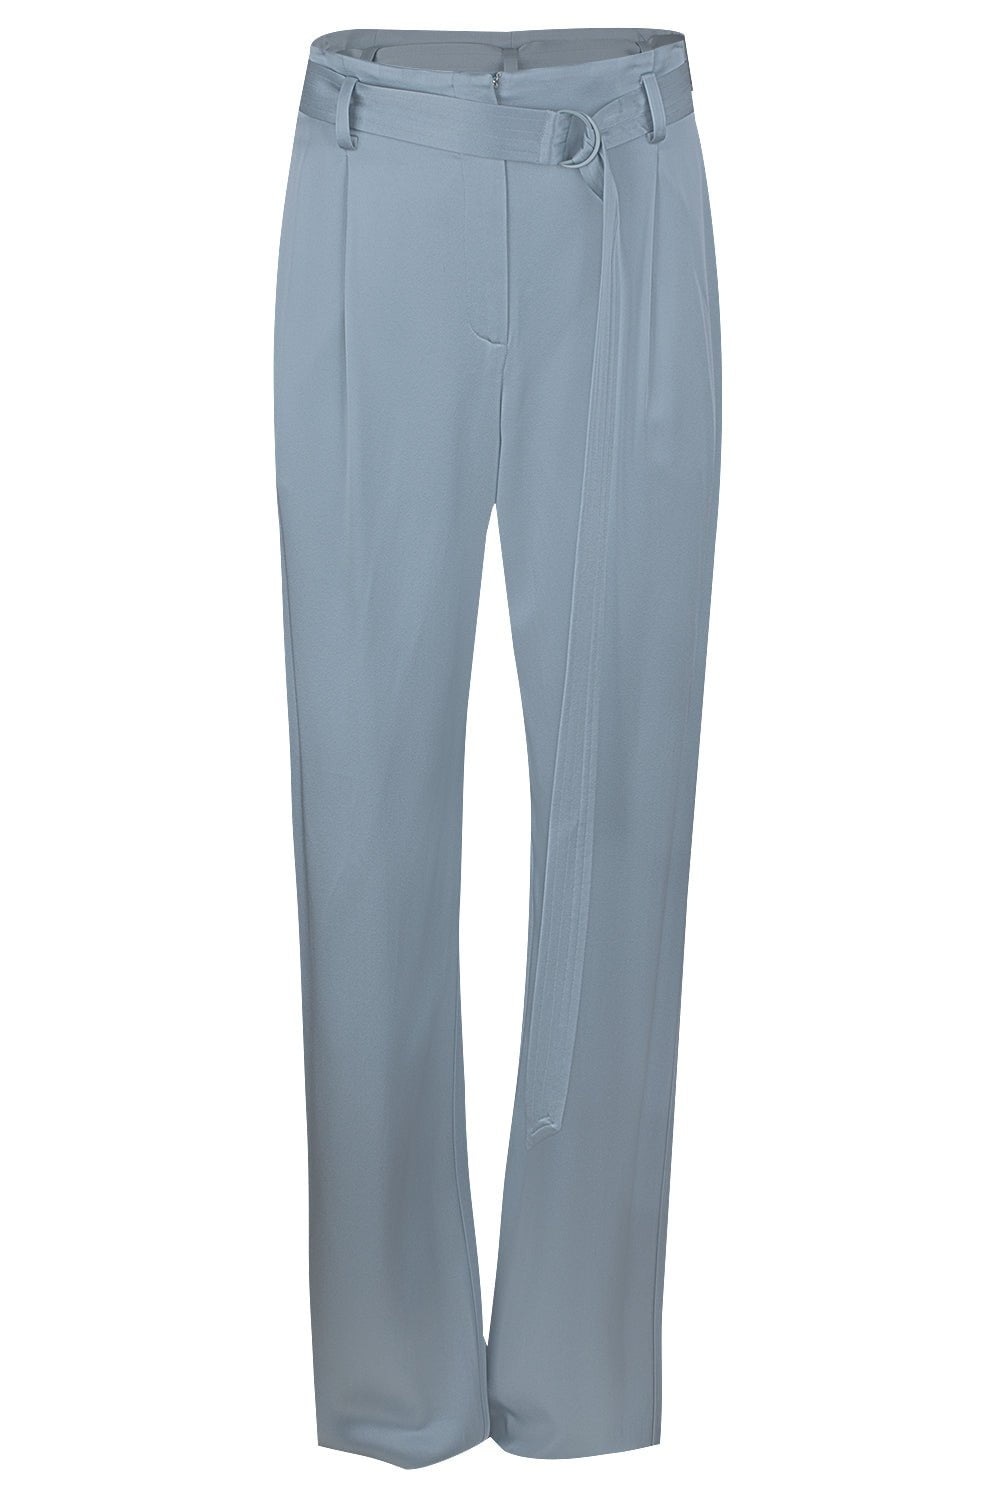 LAPOINTE-High Waisted Belt Pant - Dove-